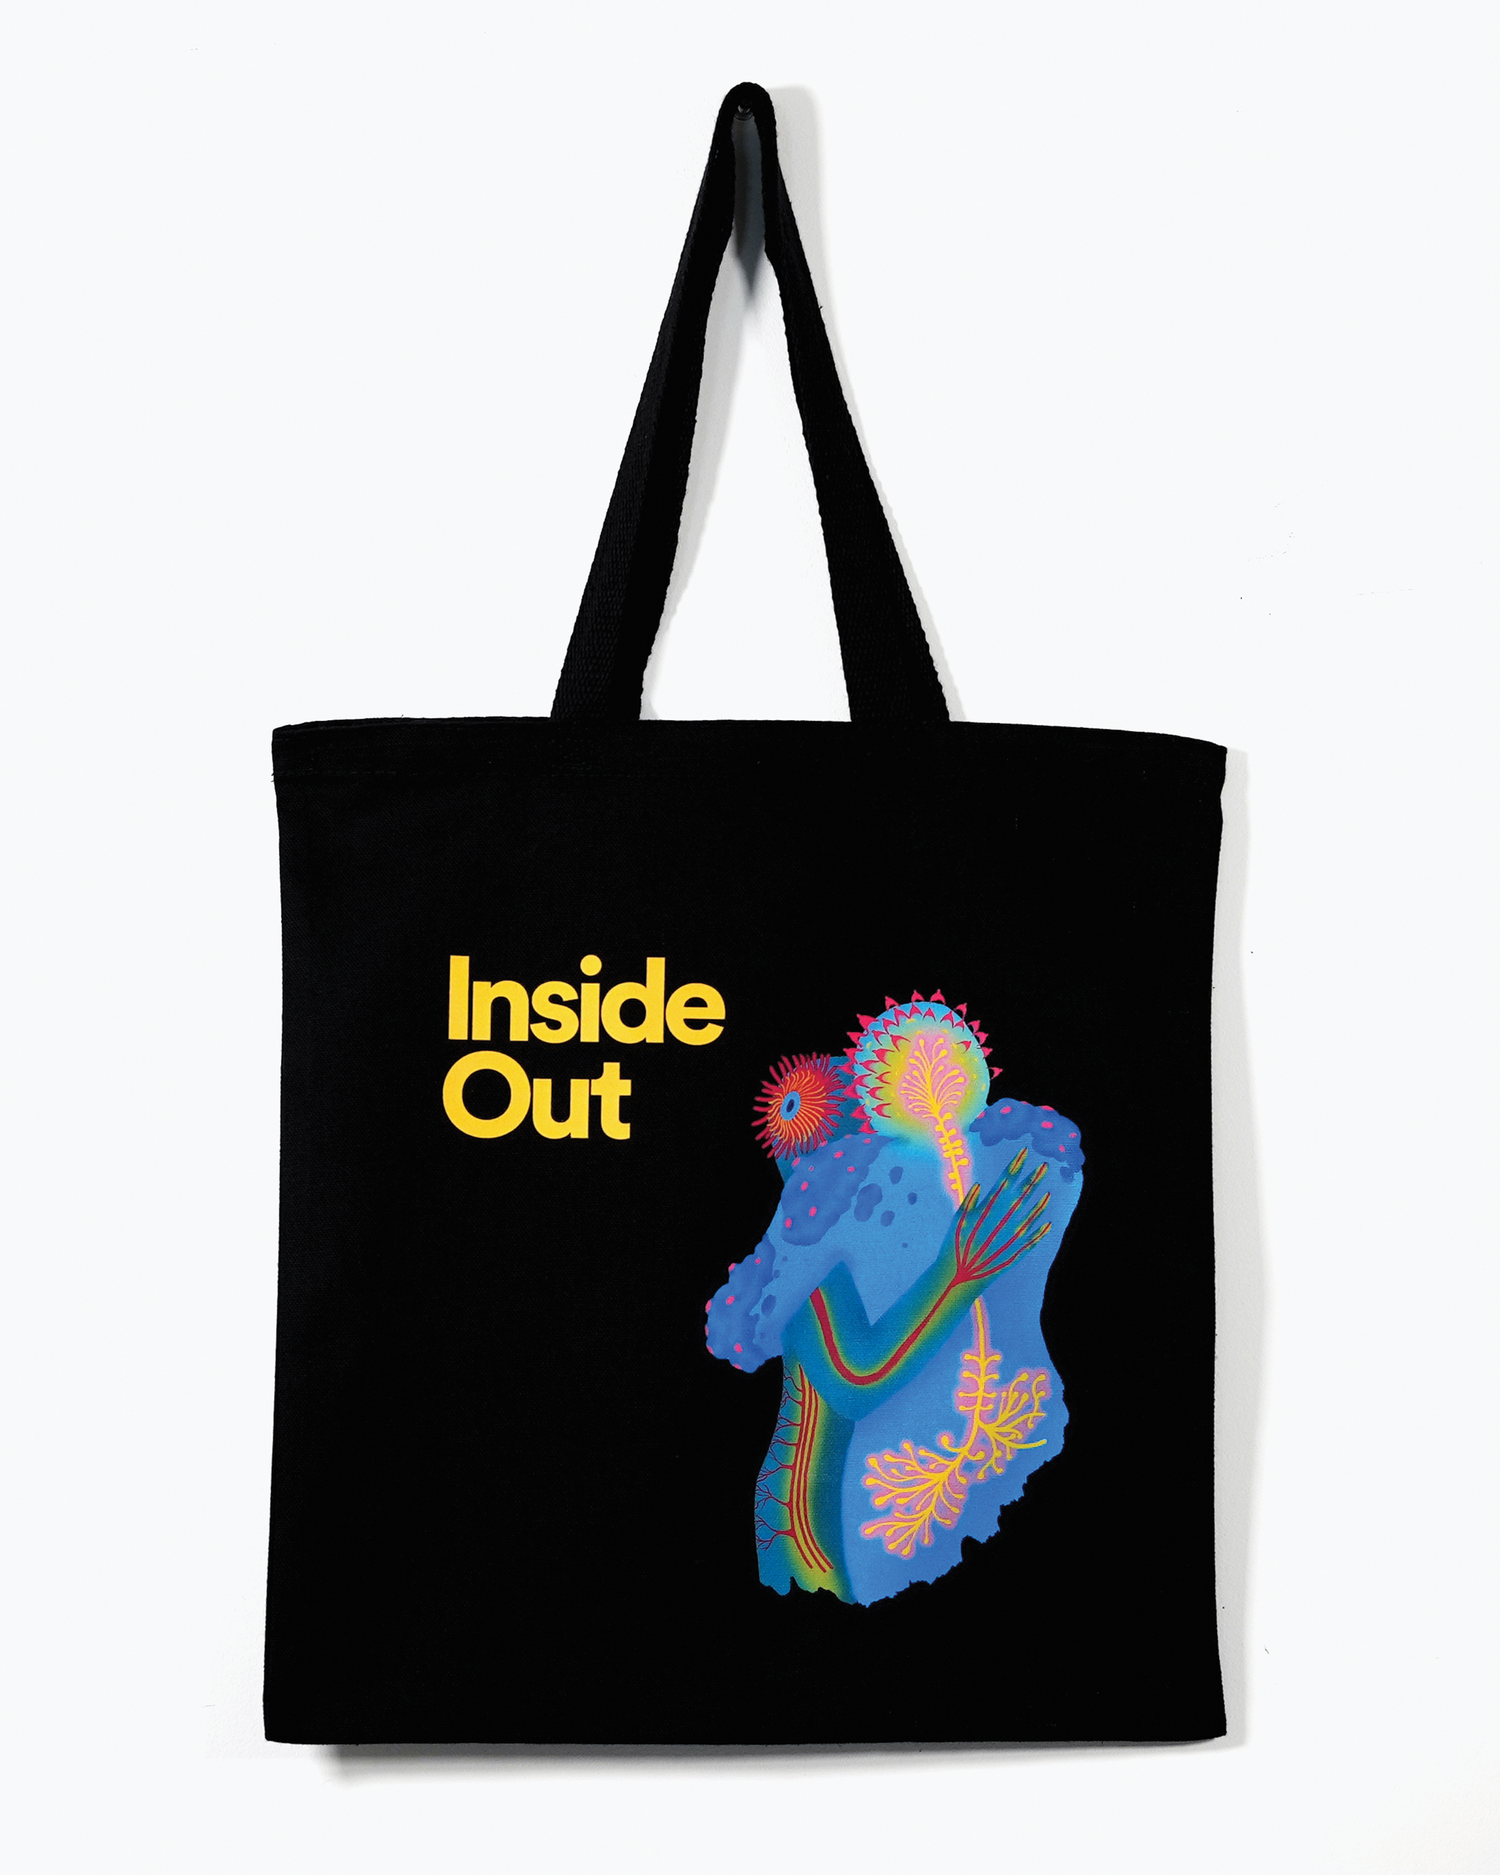 Inside Out - The Shop